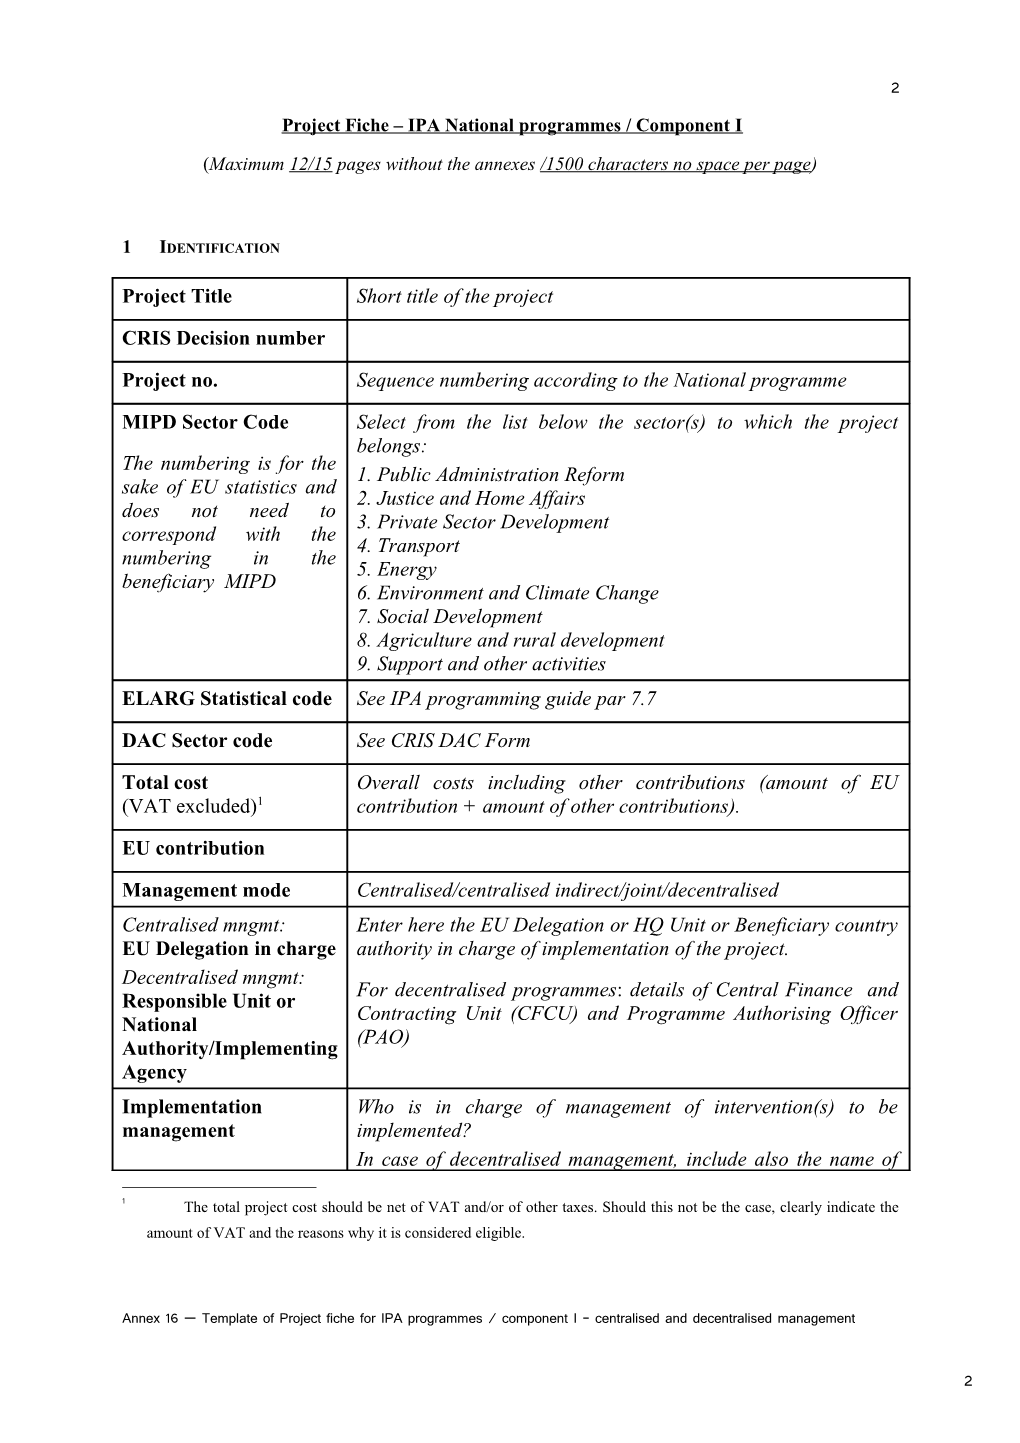 Annex 15 Template of Project Fiche for IPA Programmes / Component I - Centralised Management